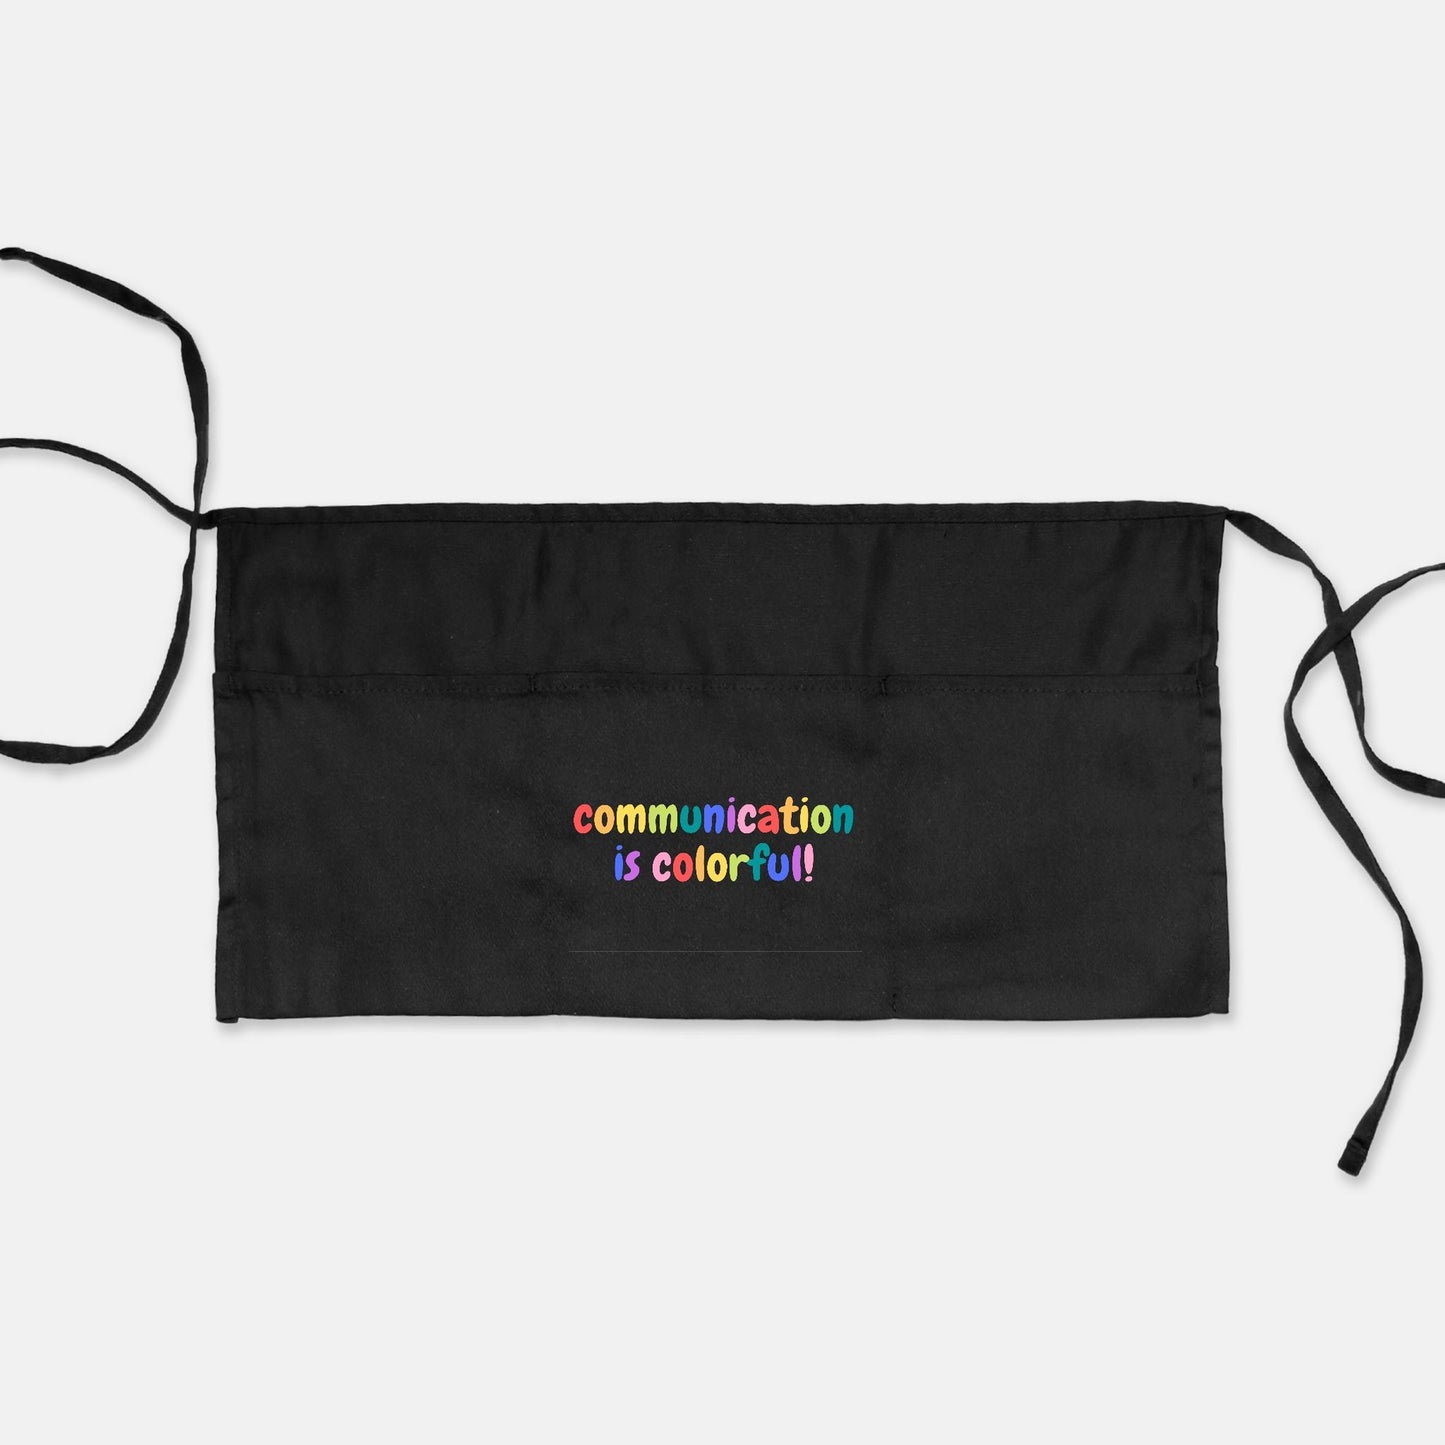 Communication is Colorful Apron